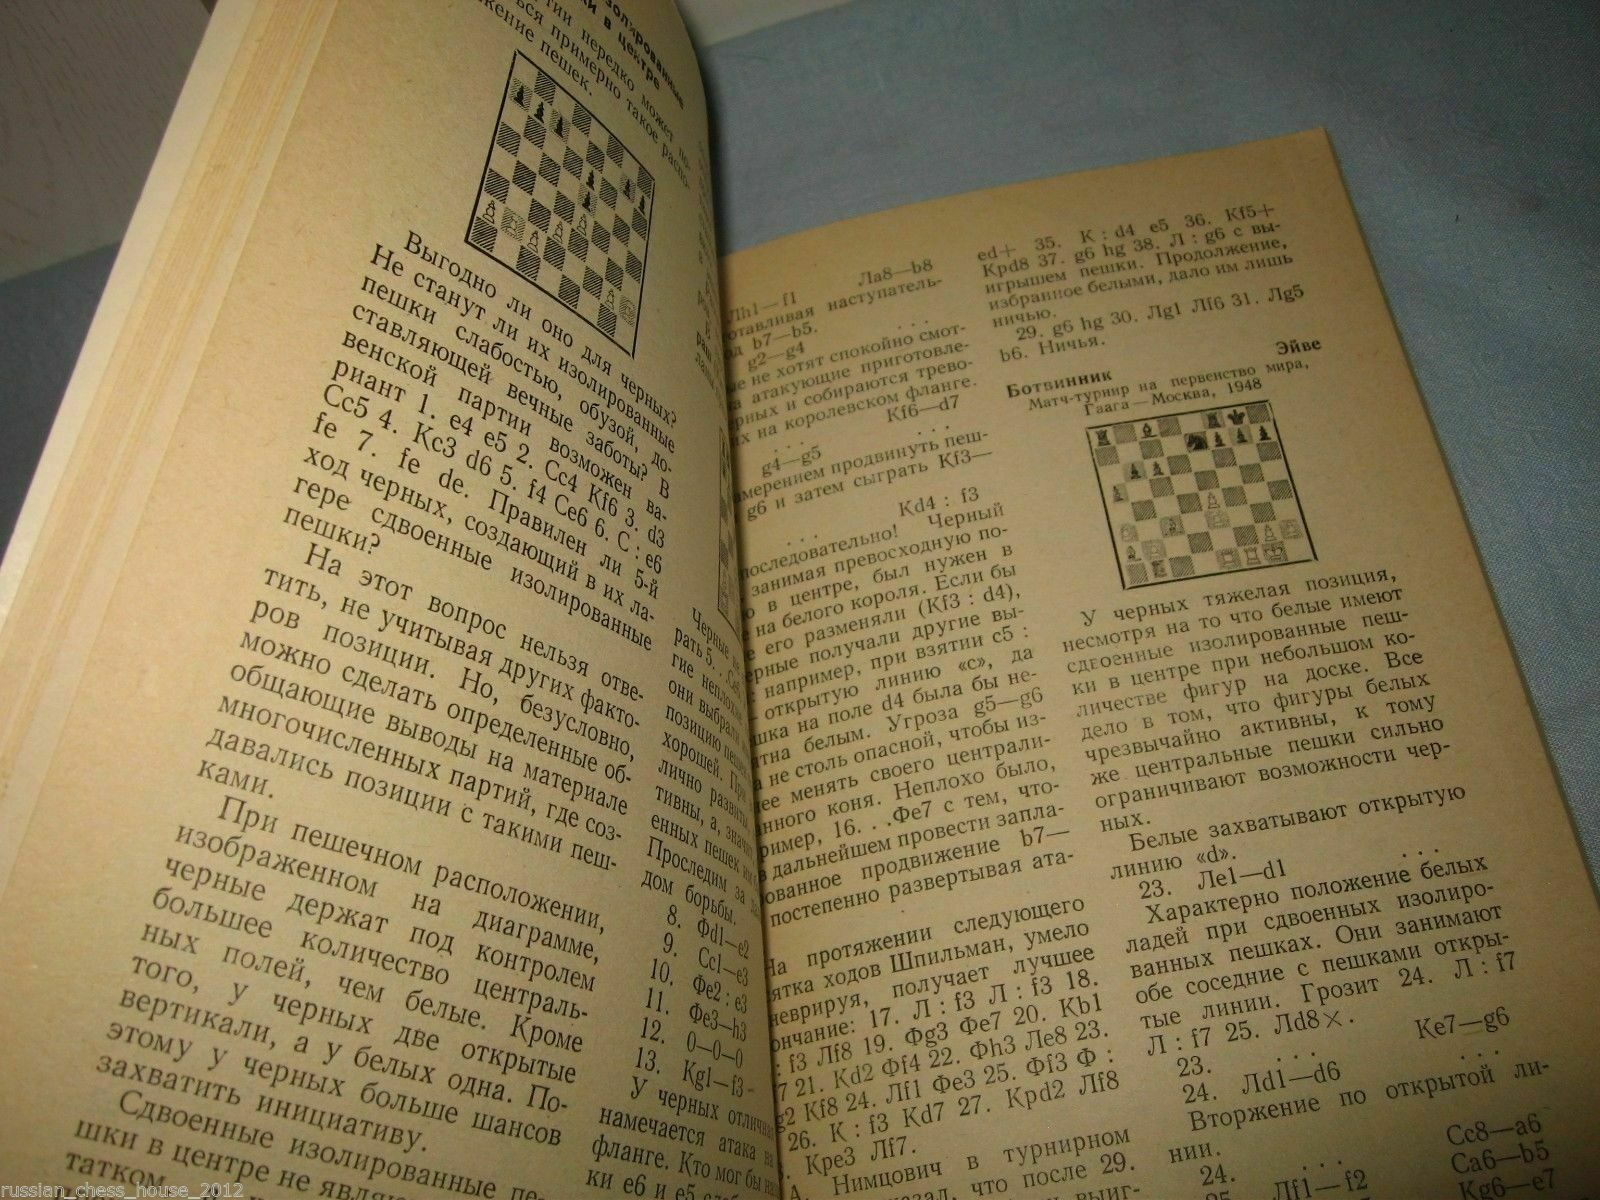 11123.Chess book: signed Persits for Roshal, importance of mid board in game 1983